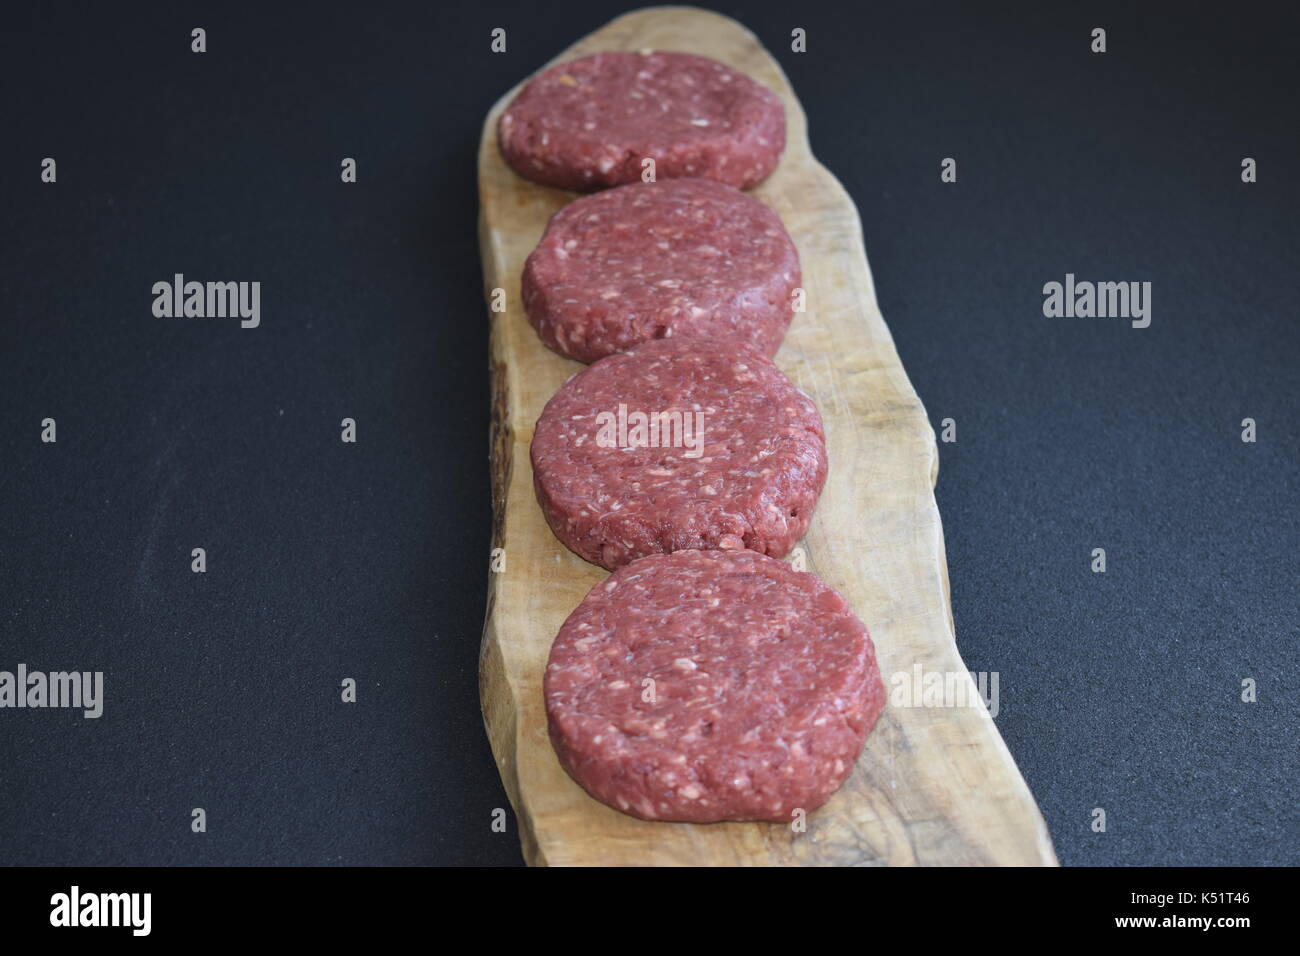 Raw meat on a wooden surface ready to cook Stock Photo